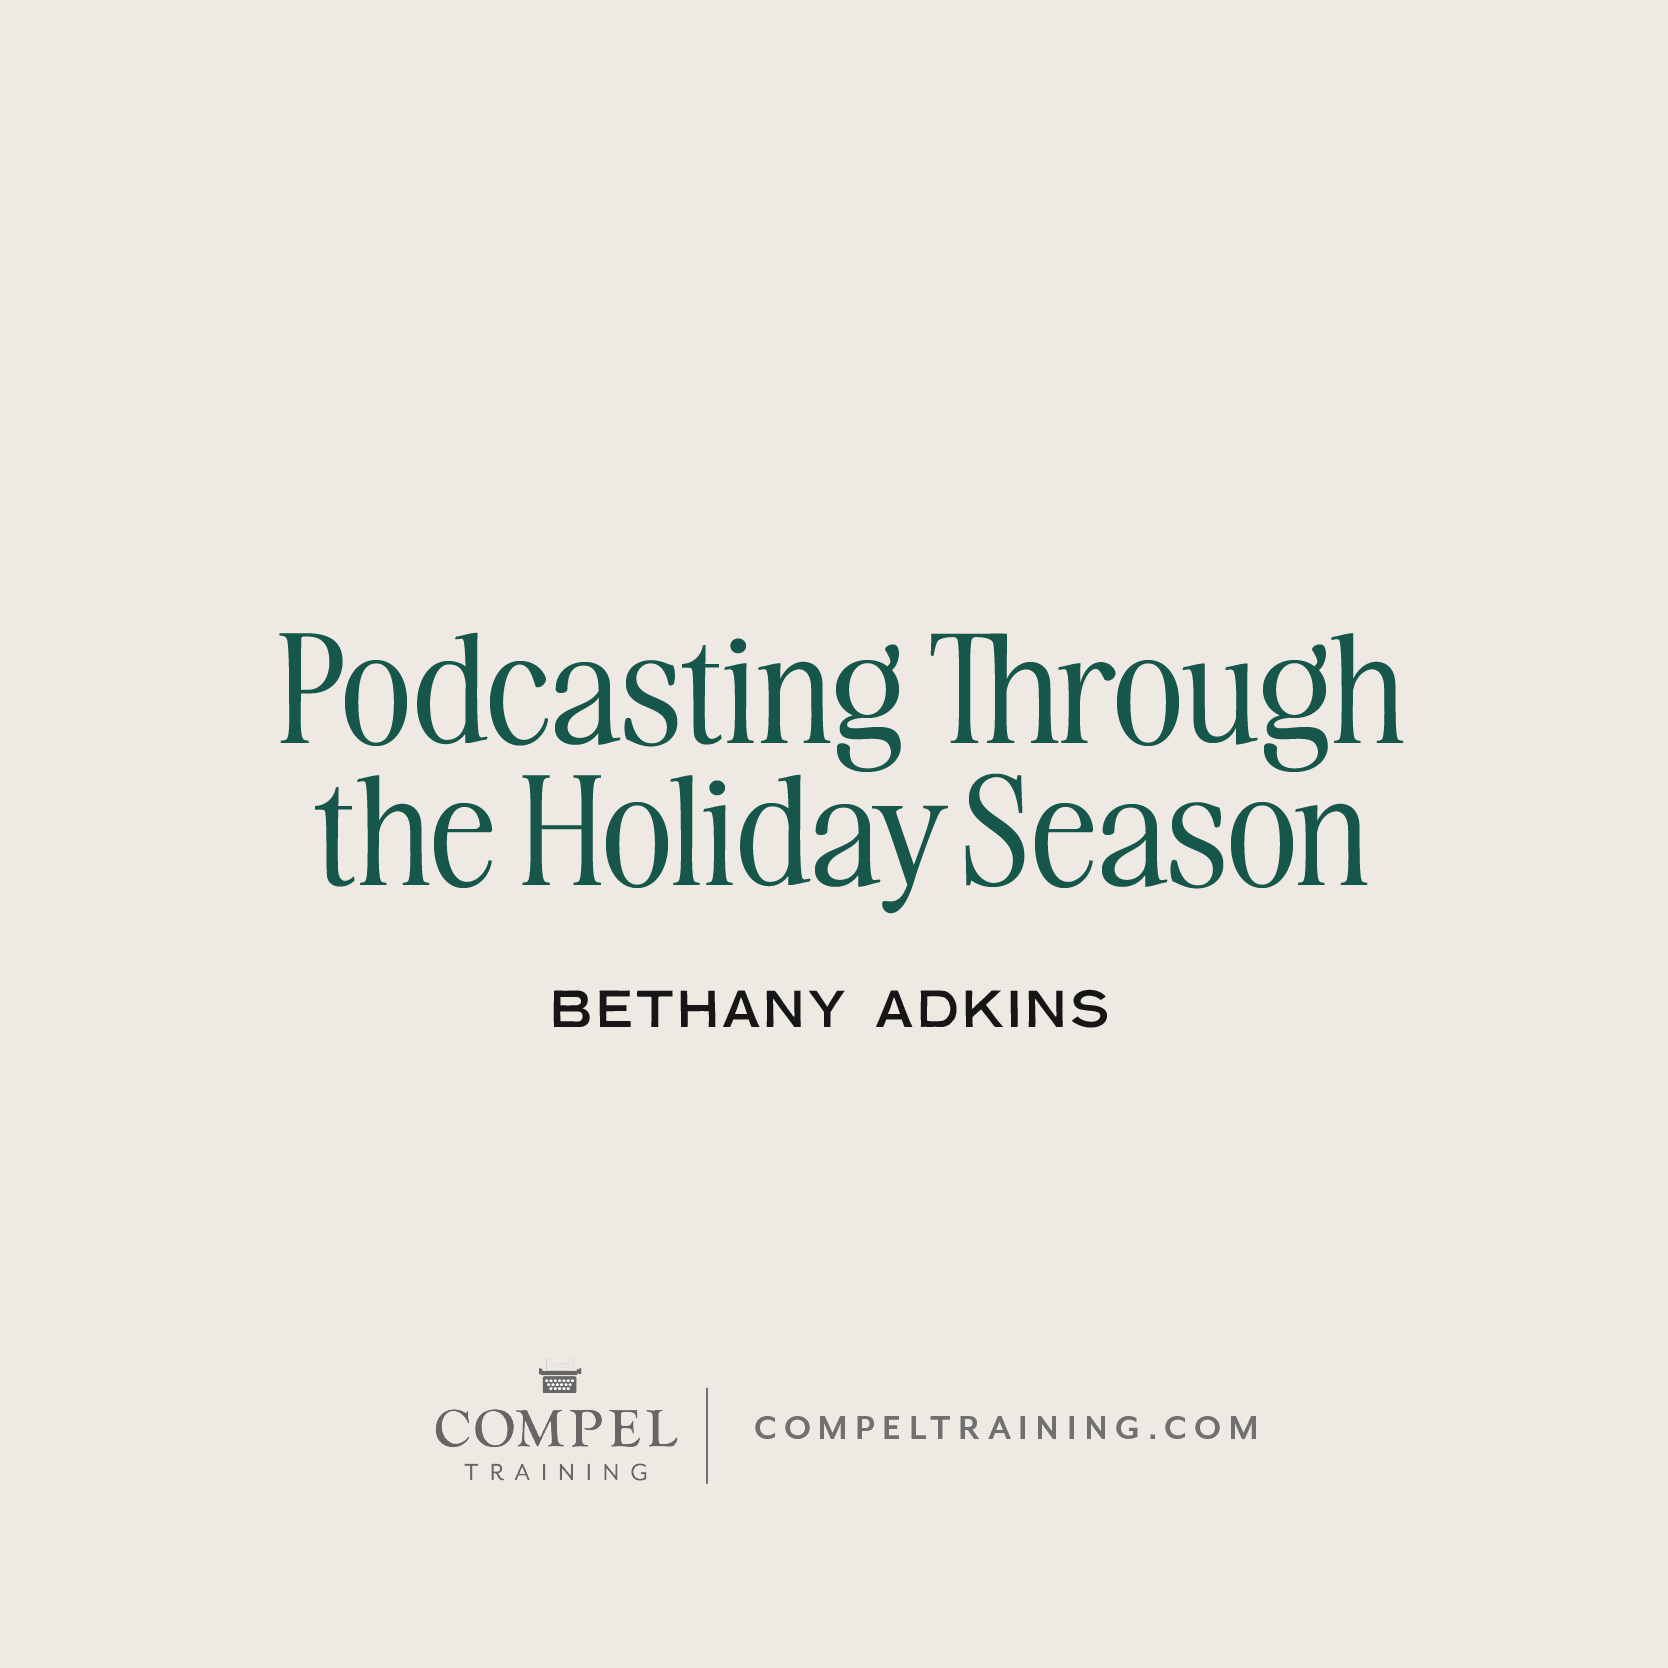 It’s the holiday season once again, and the big question for podcasters is how to embrace it? Should you take a break? Should you do a holiday series? The options seem endless. Here are a few ideas to set up a successful plan for your podcast this holiday season!